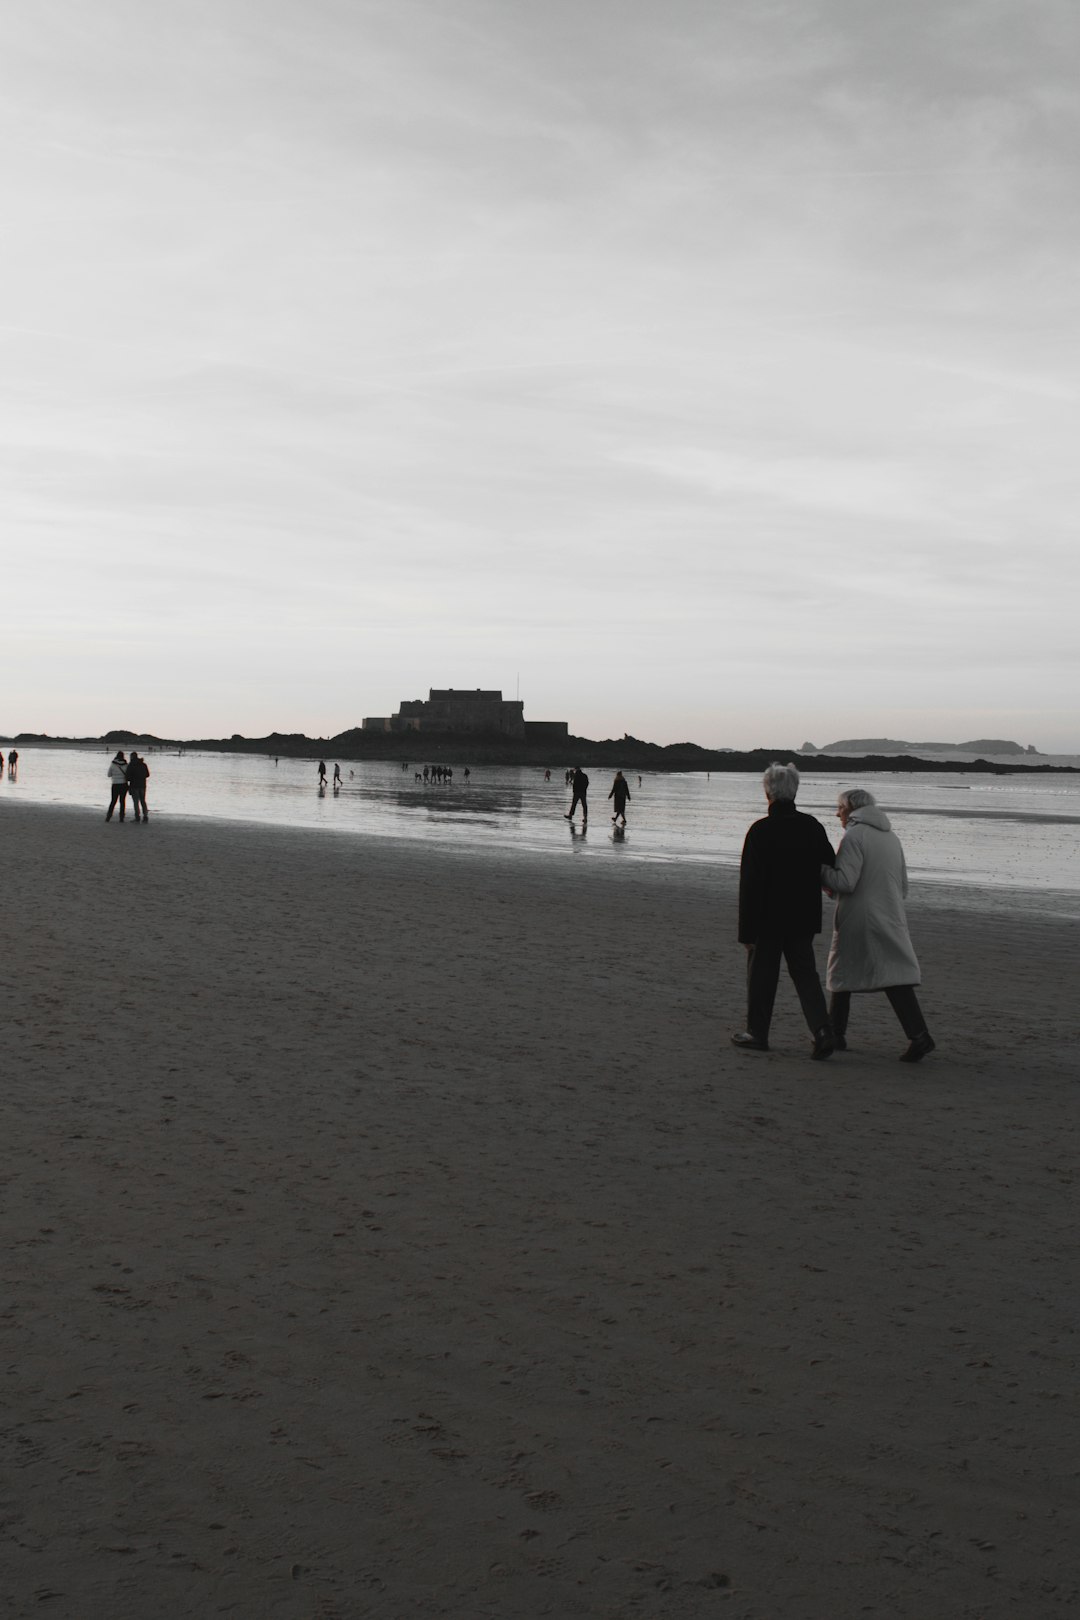 grayscale photo of people on seashore during daytime